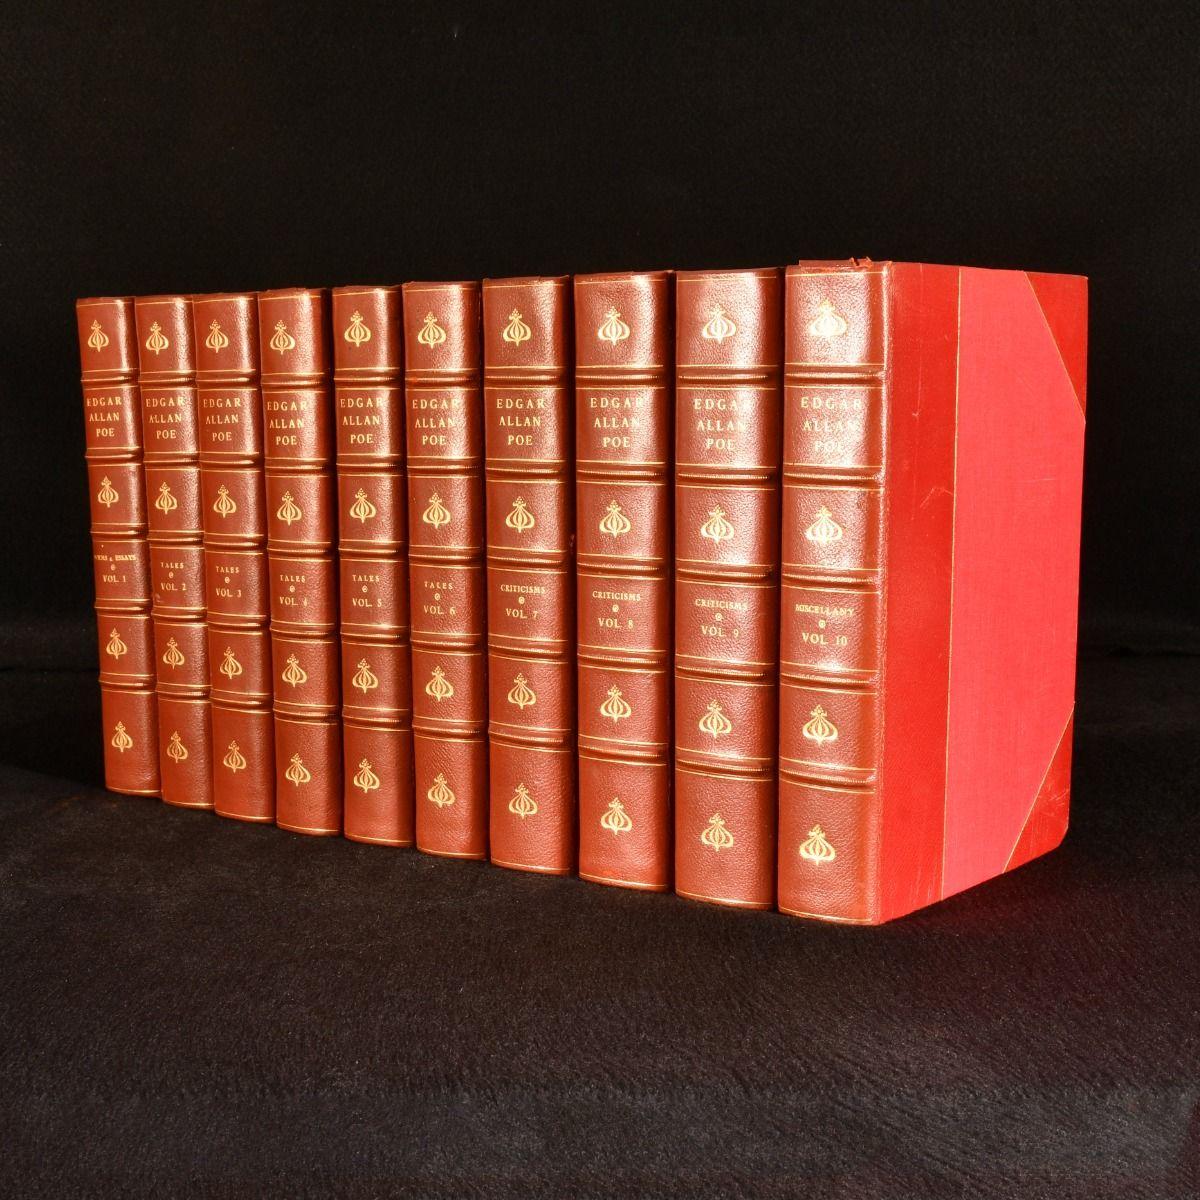 A beautiful limited edition set of the complete works of Edgar Allan Poe, illustrated with ten plates to each volume, and signed by the publisher.

The Arnheim Edition of Poe's works.

This set is number thirty-seven of three-hundred signed and